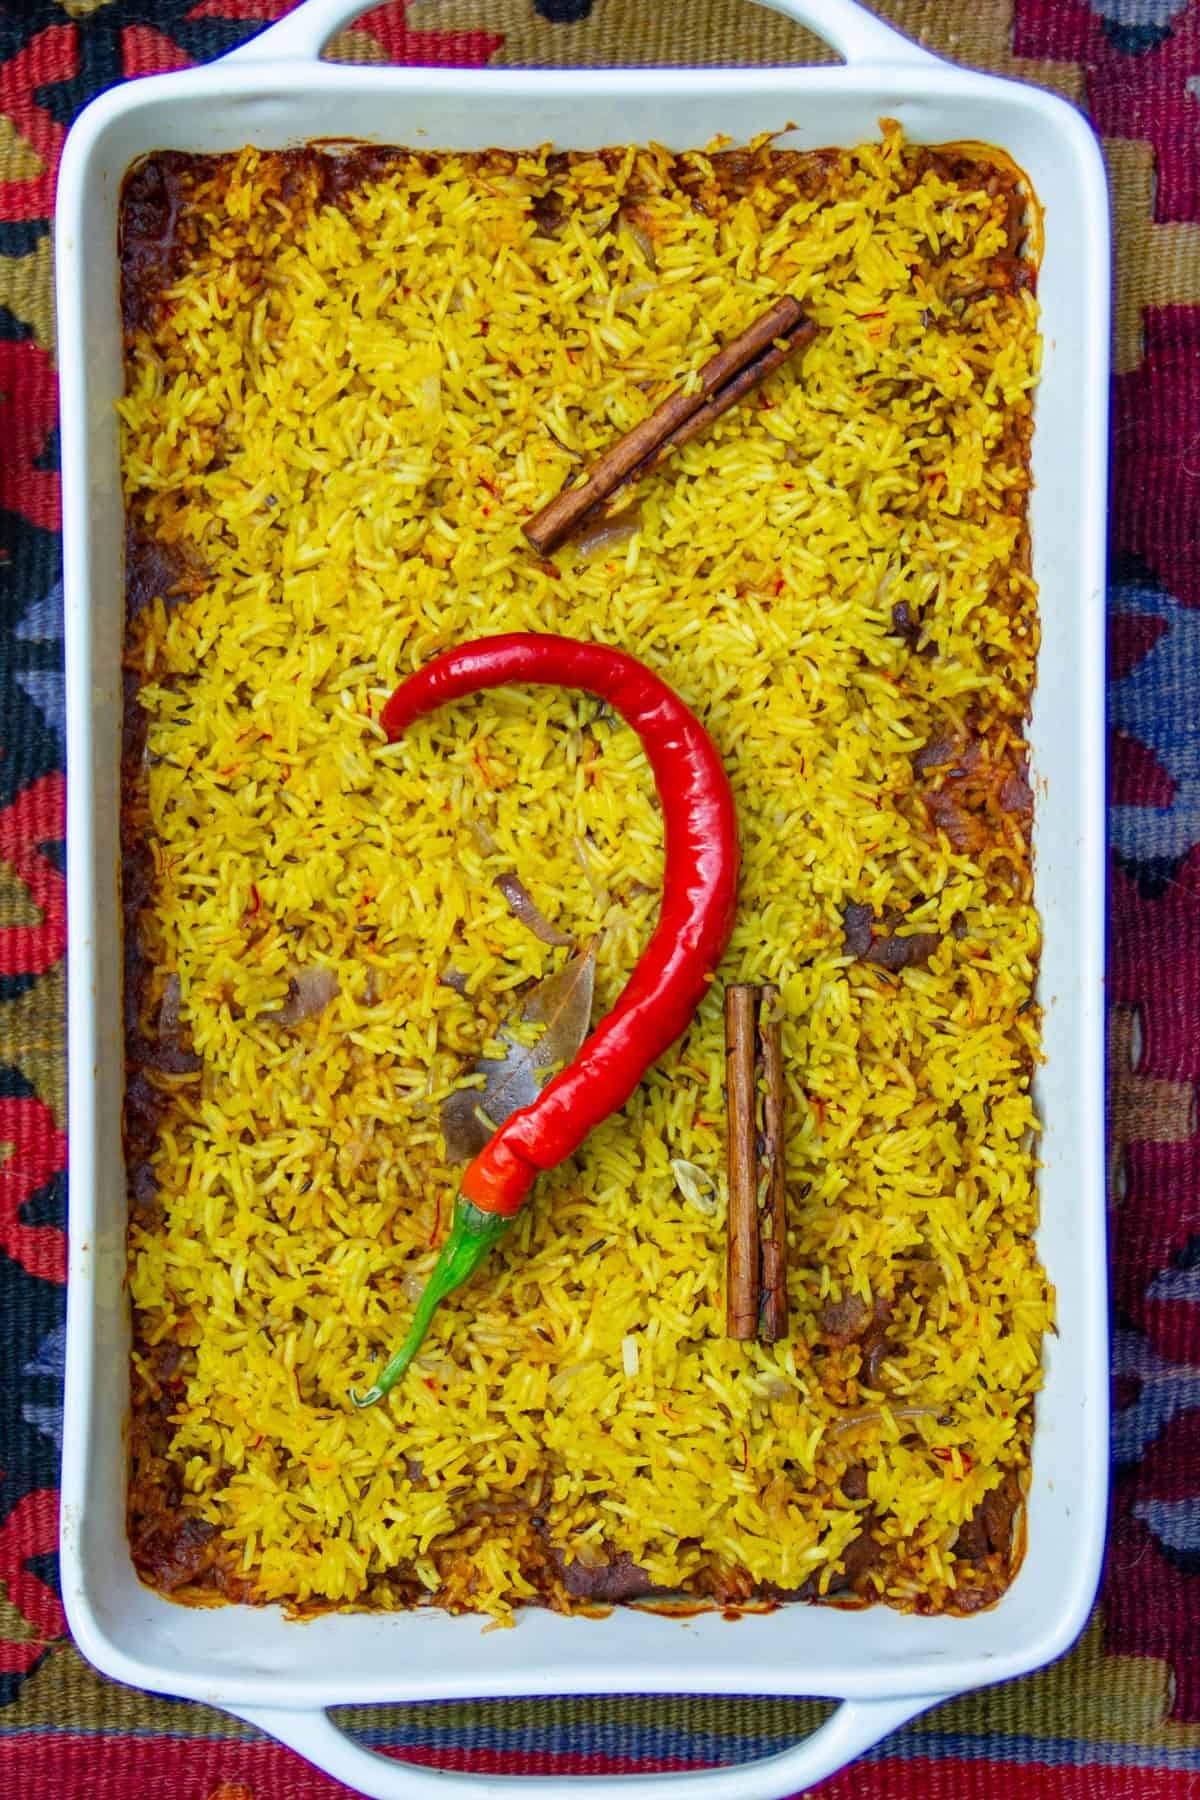 Rectangular casserole filled with Indian lamb biryani, the top layer of saffron colored rice showing with a curvy pepper garnishing the center and two cinnamon sticks.